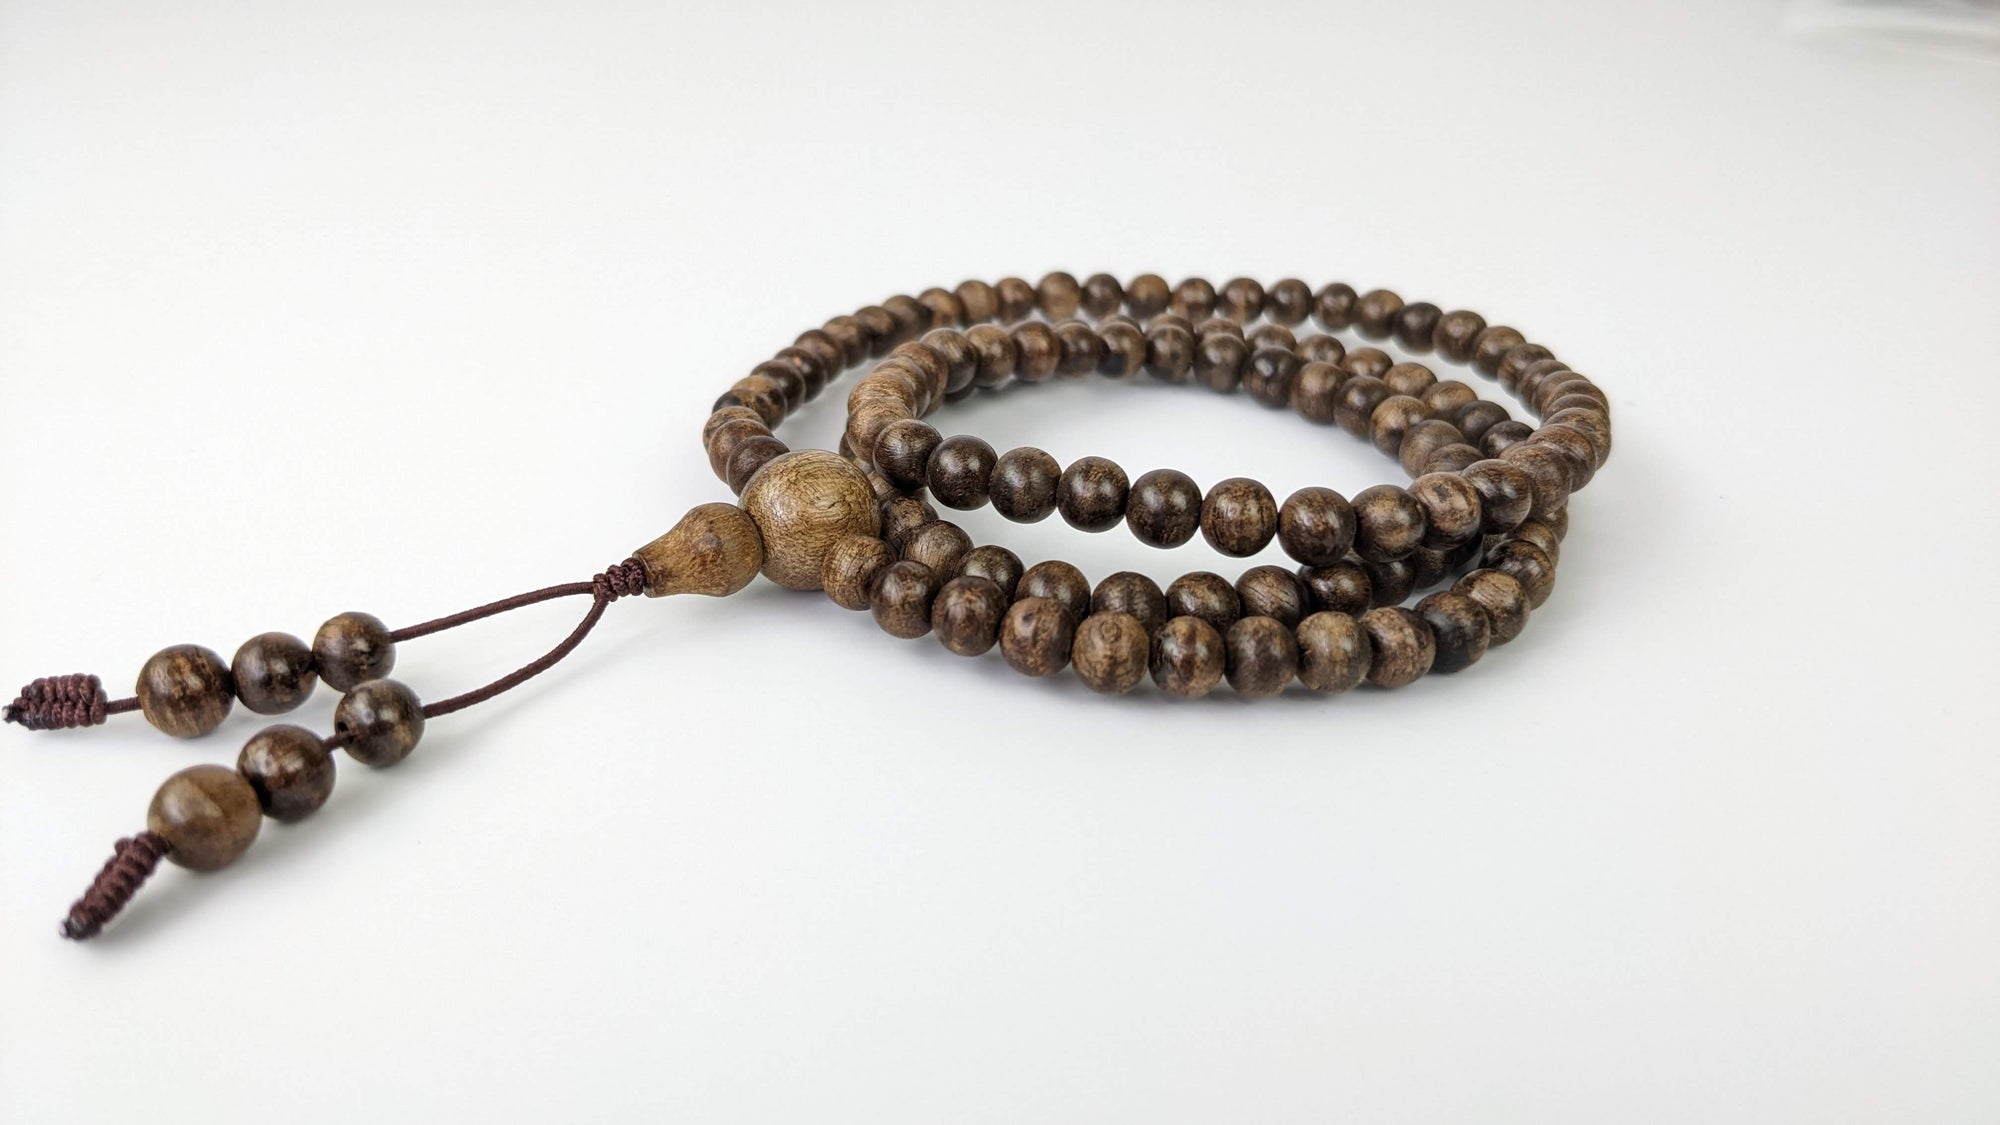 *New* The Grace - 108 mala made with Wild Agarwood from the tropical Island Borneo -